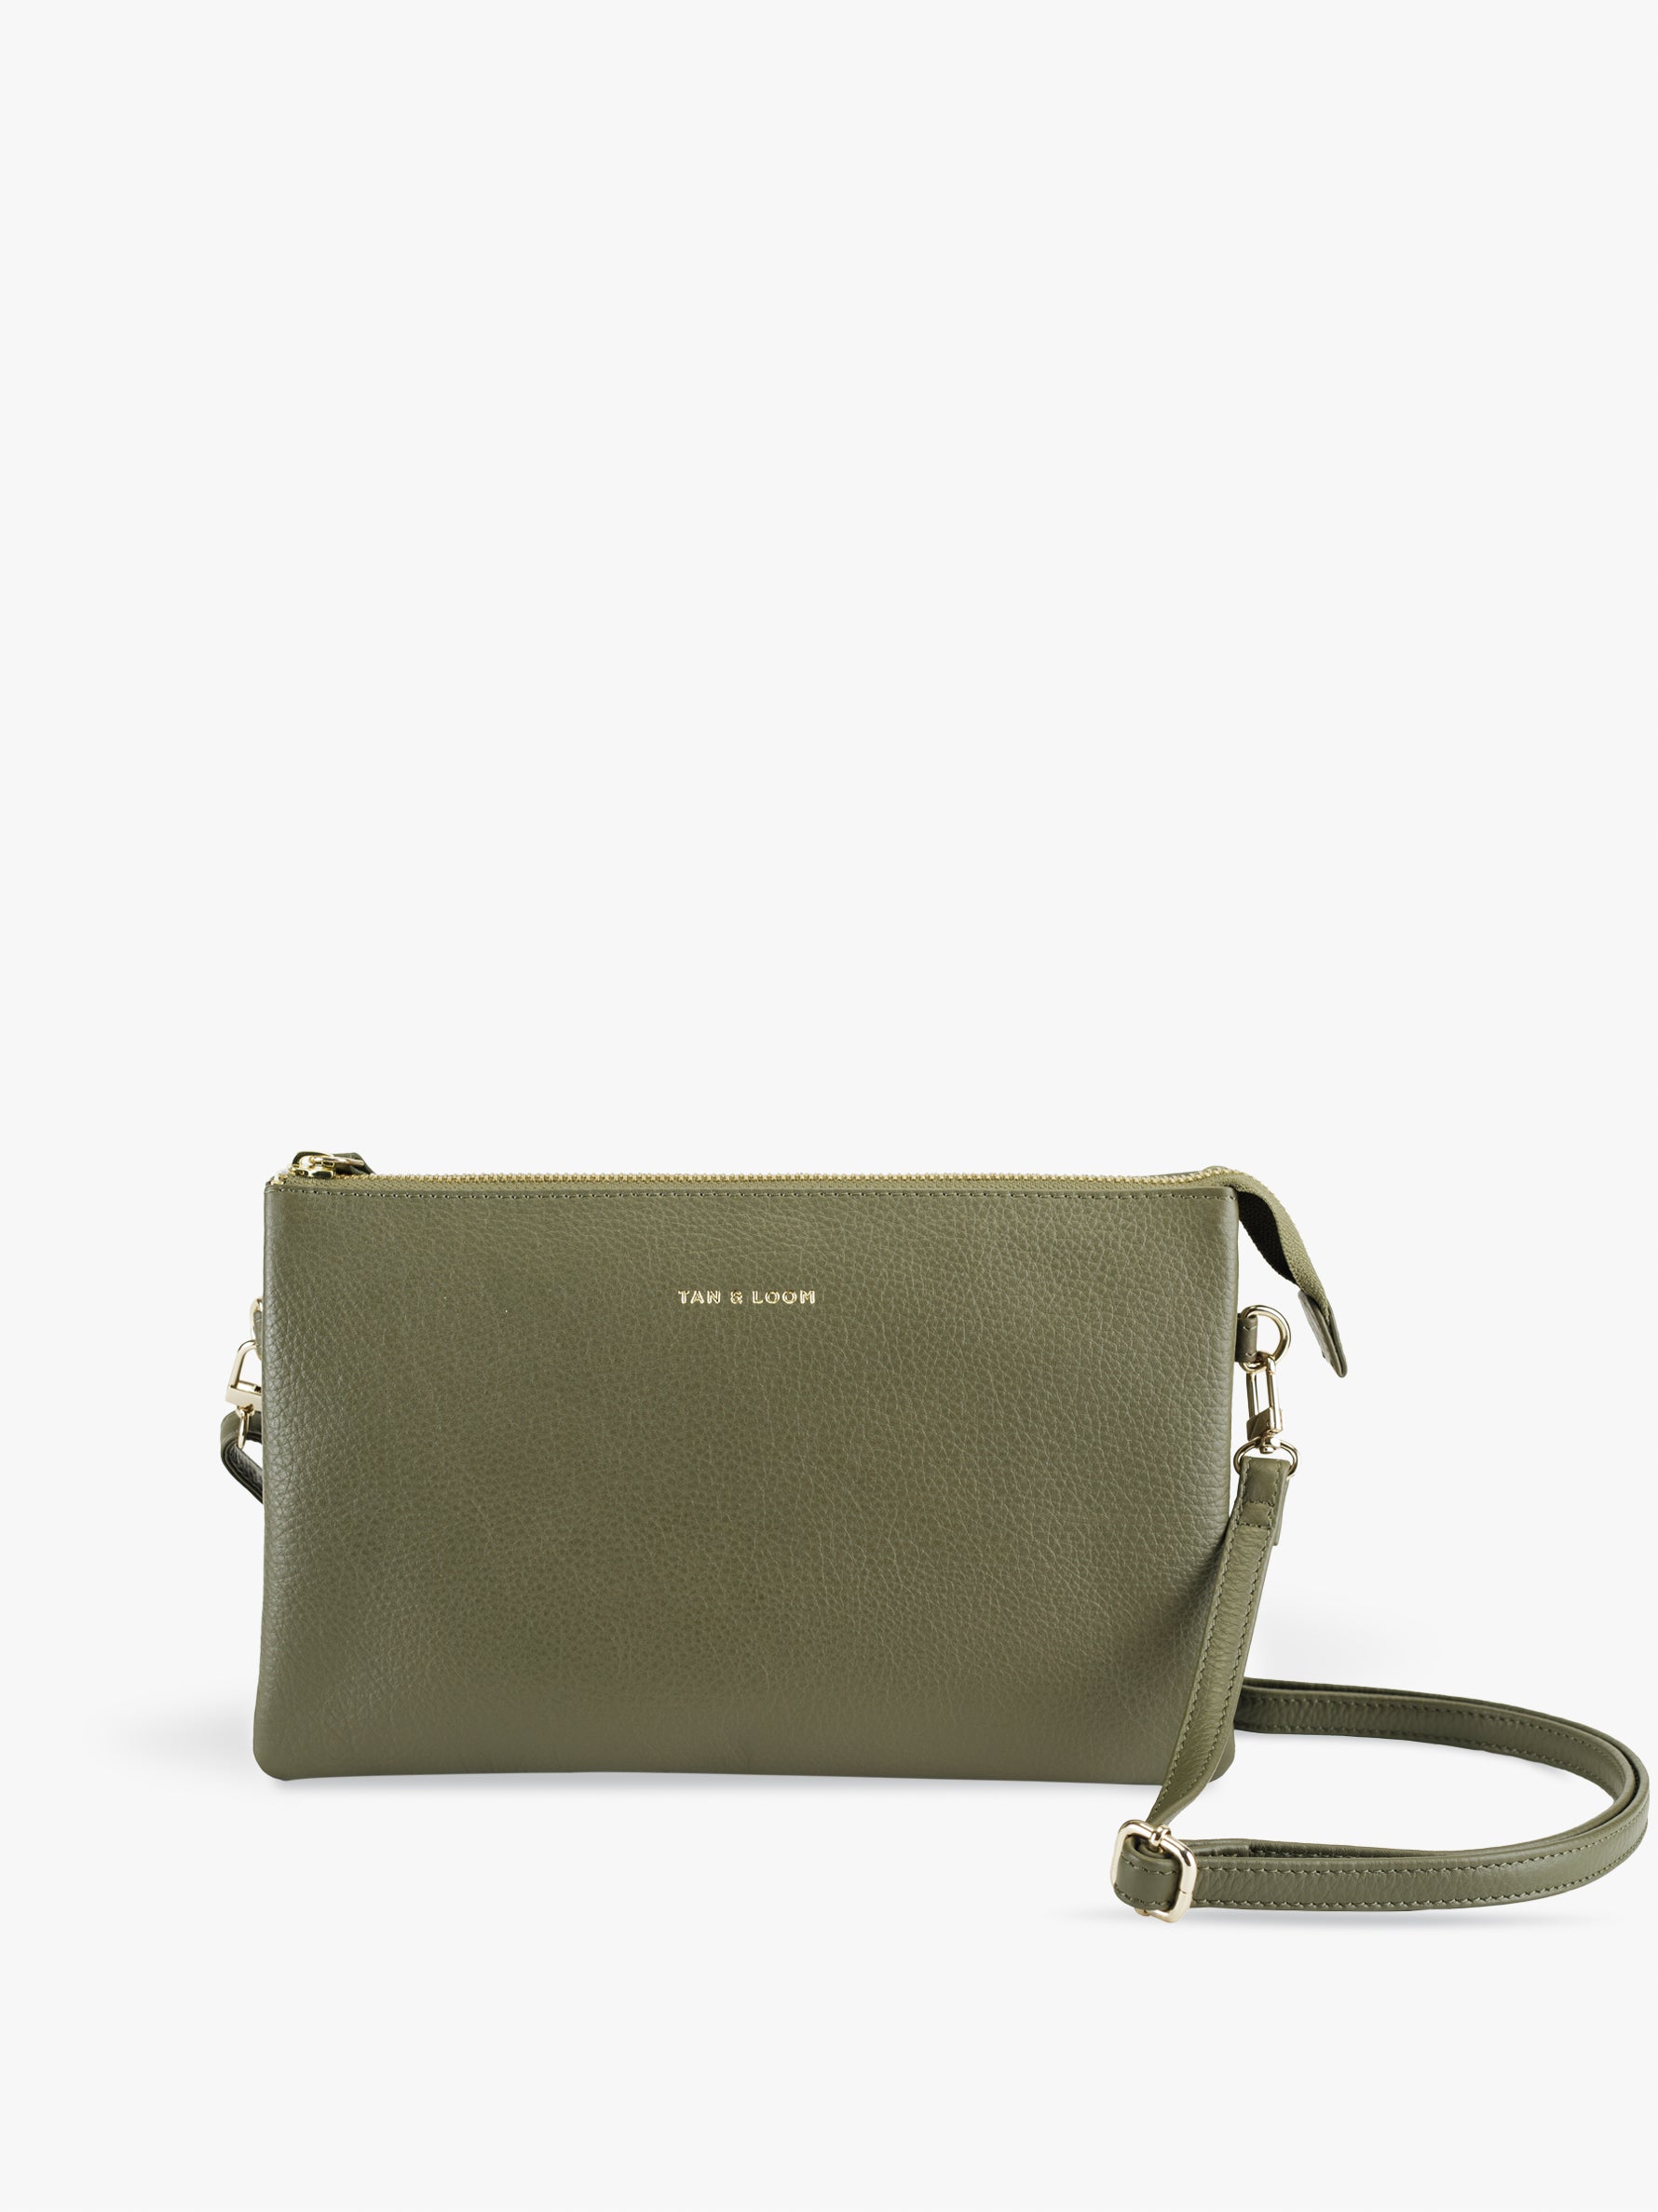 Handcrafted genuine leather Commuter's Sling Bag for women Olive Green